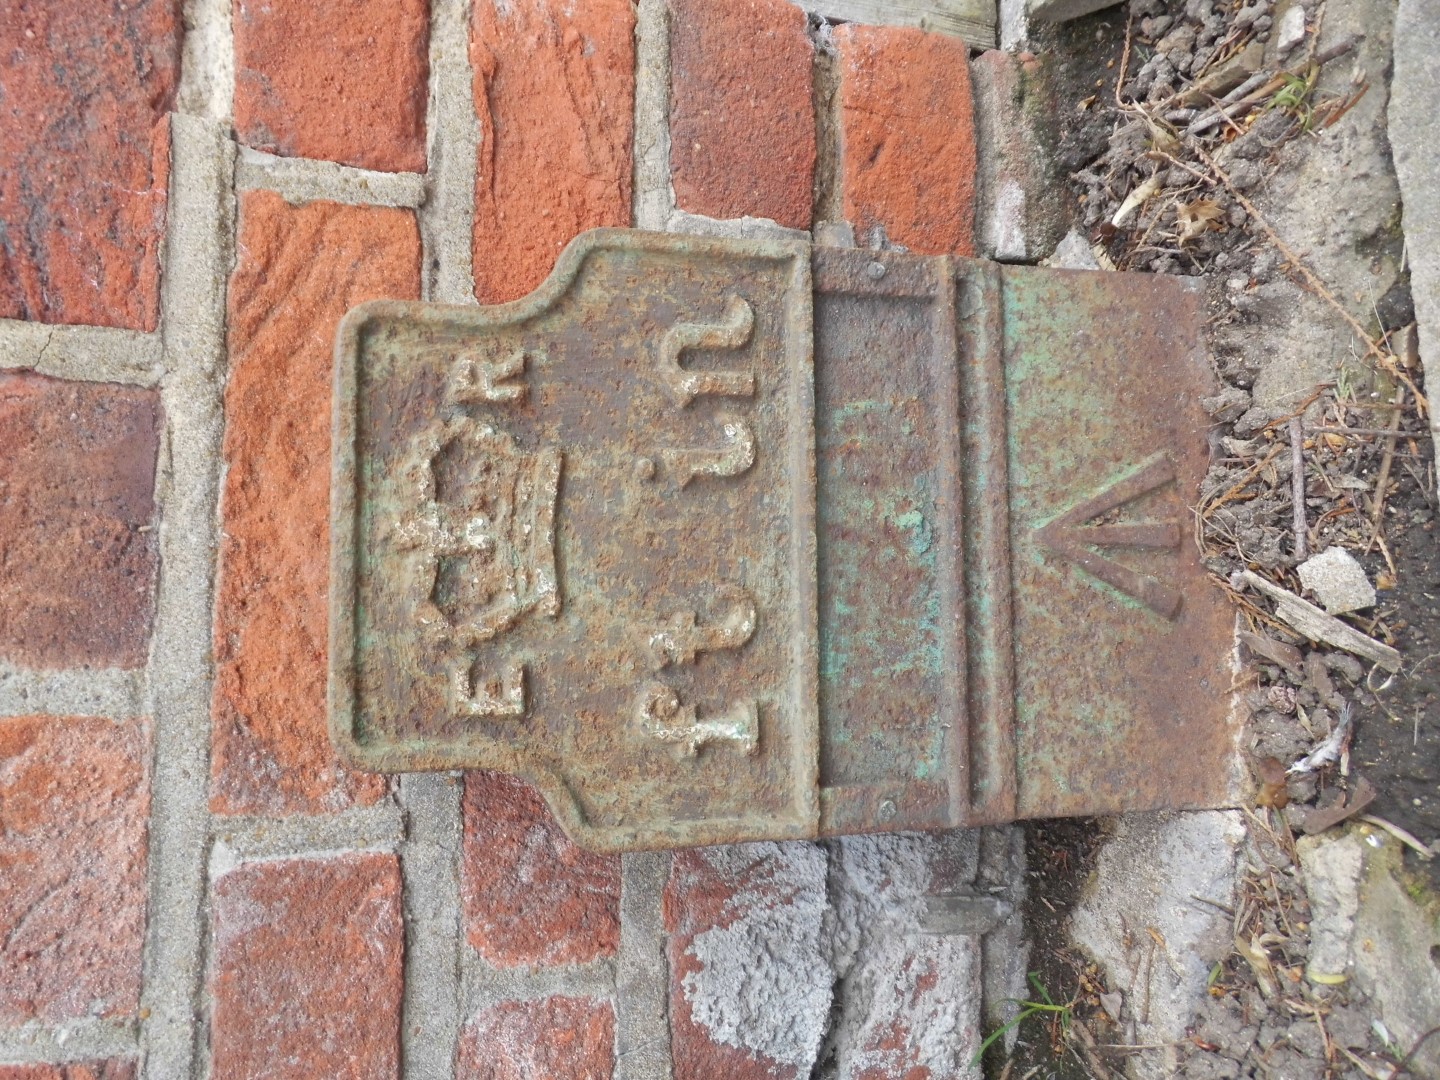 Telegraph cable marker post at 198 Hempstead Road, Watford by Derek Pattenson 